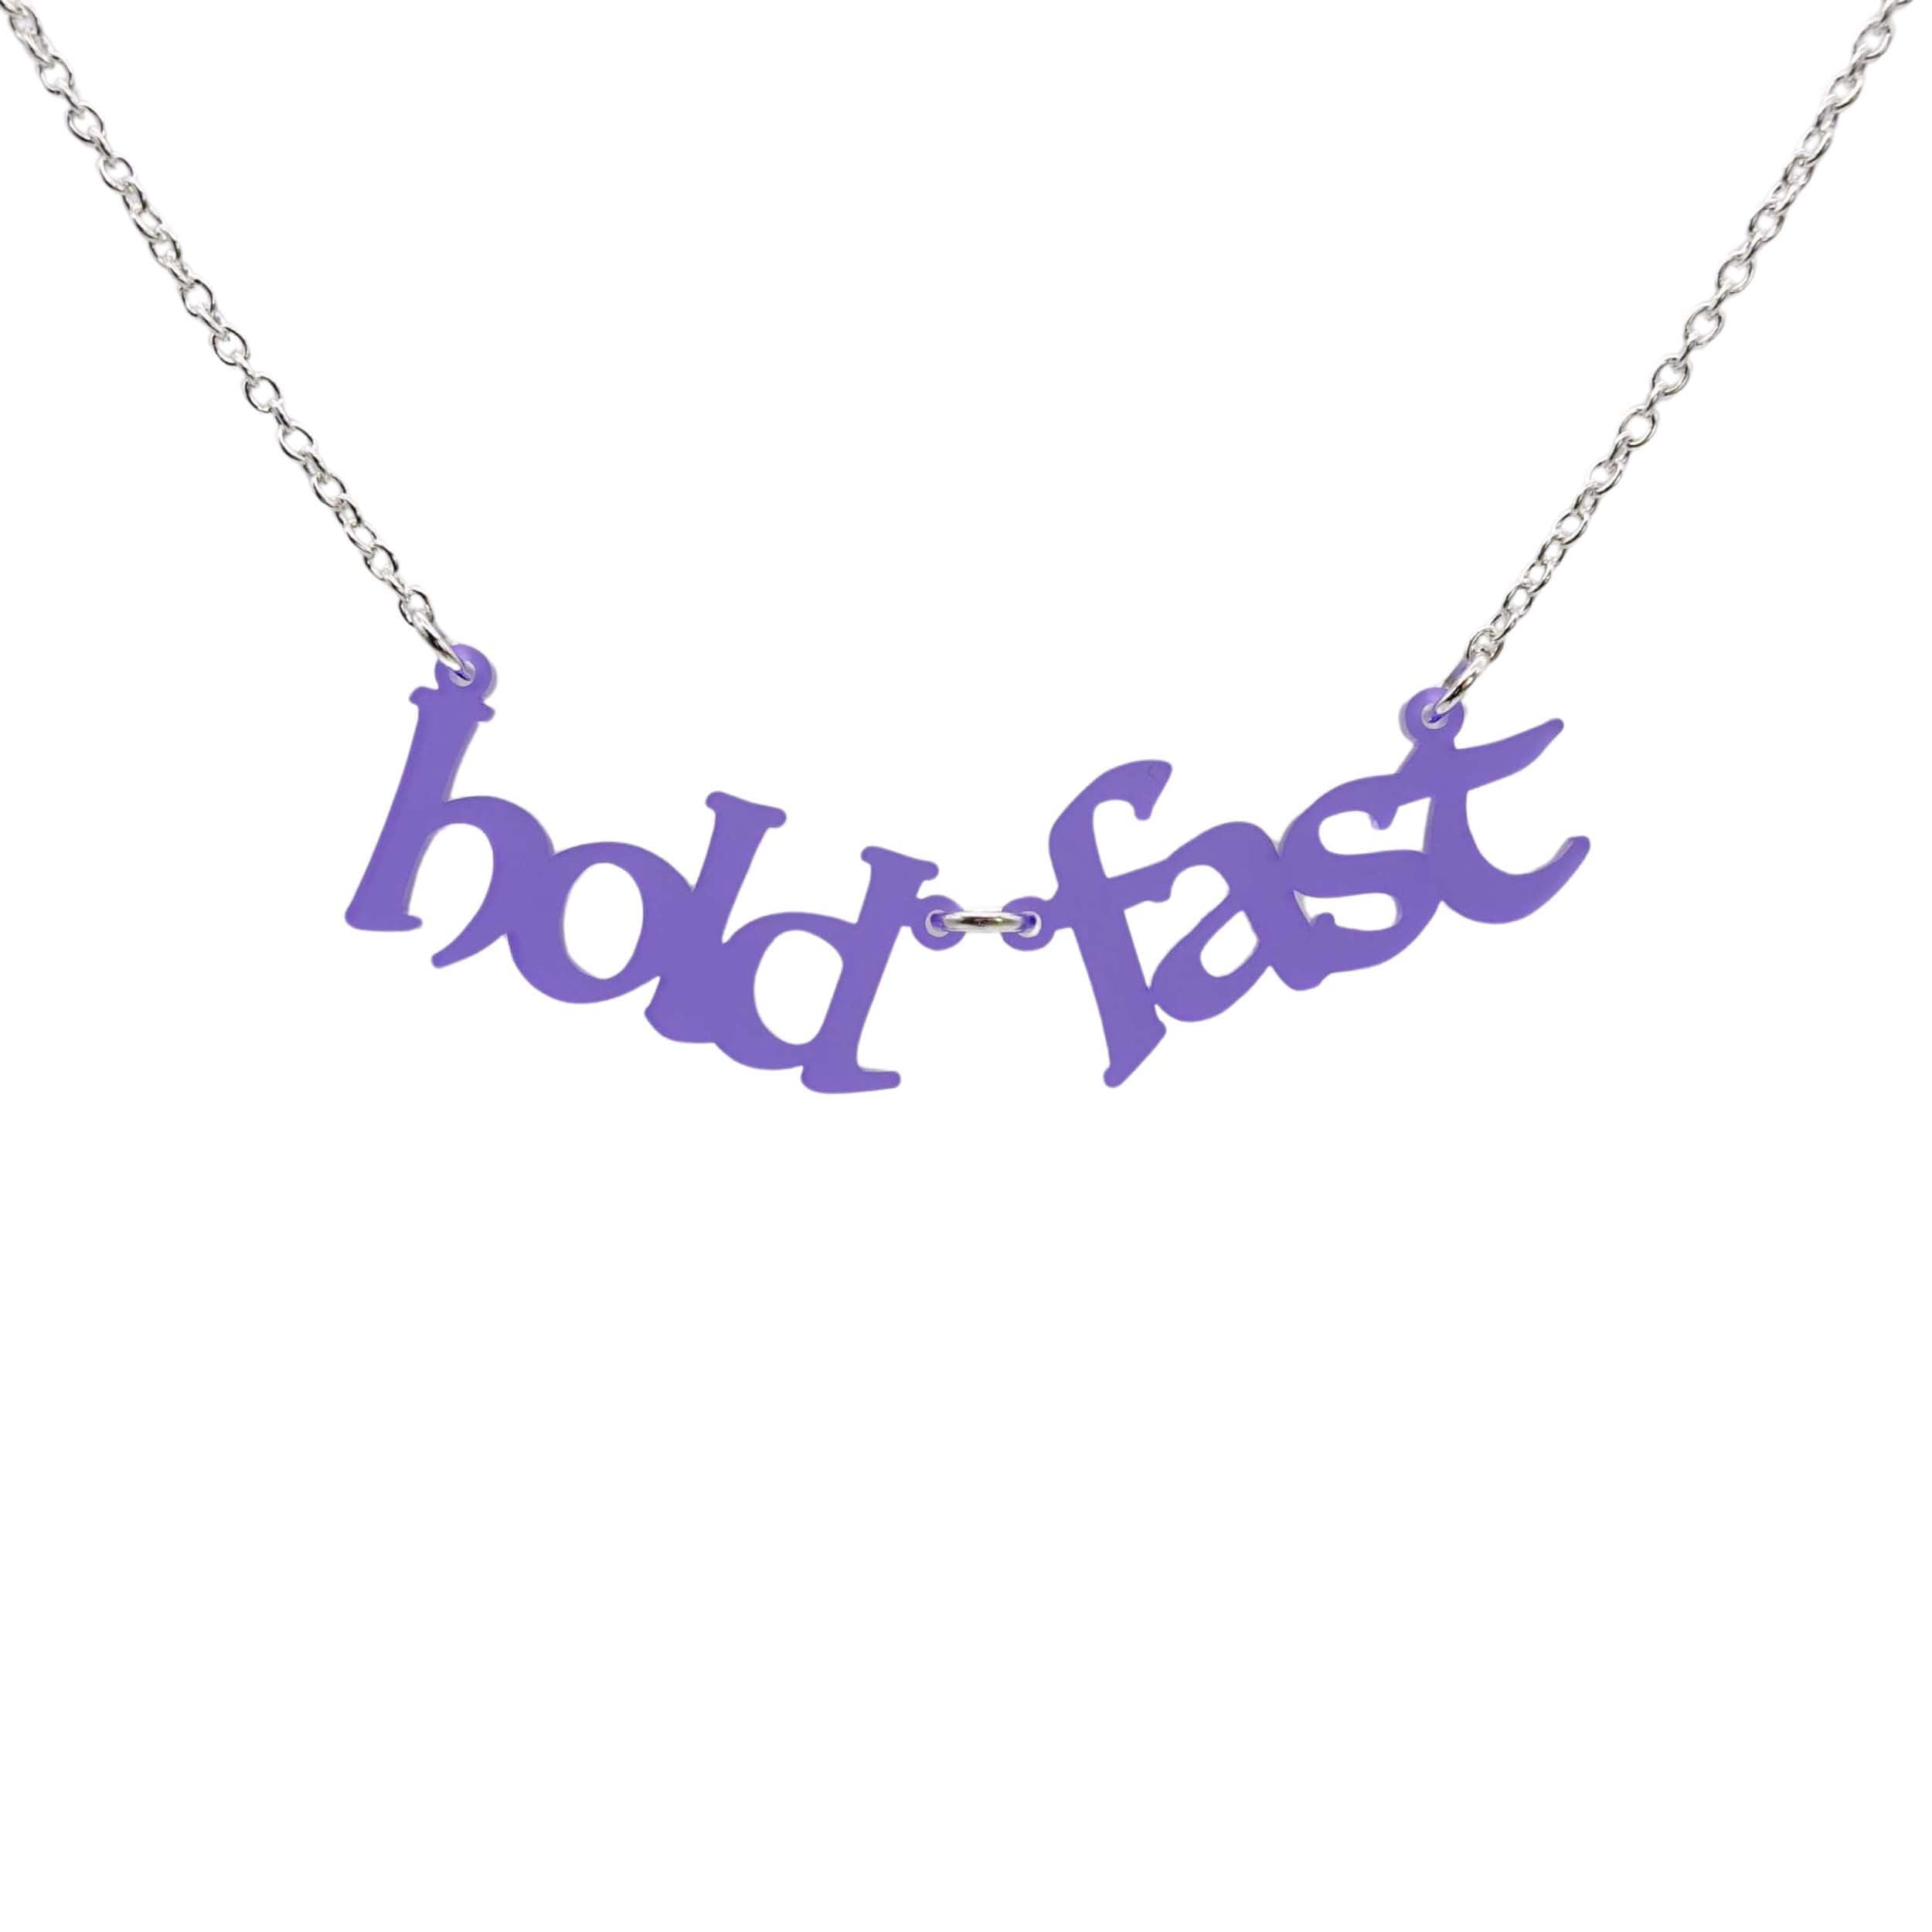 Violet frost Hold Fast necklace shown hanging against a white backround. 